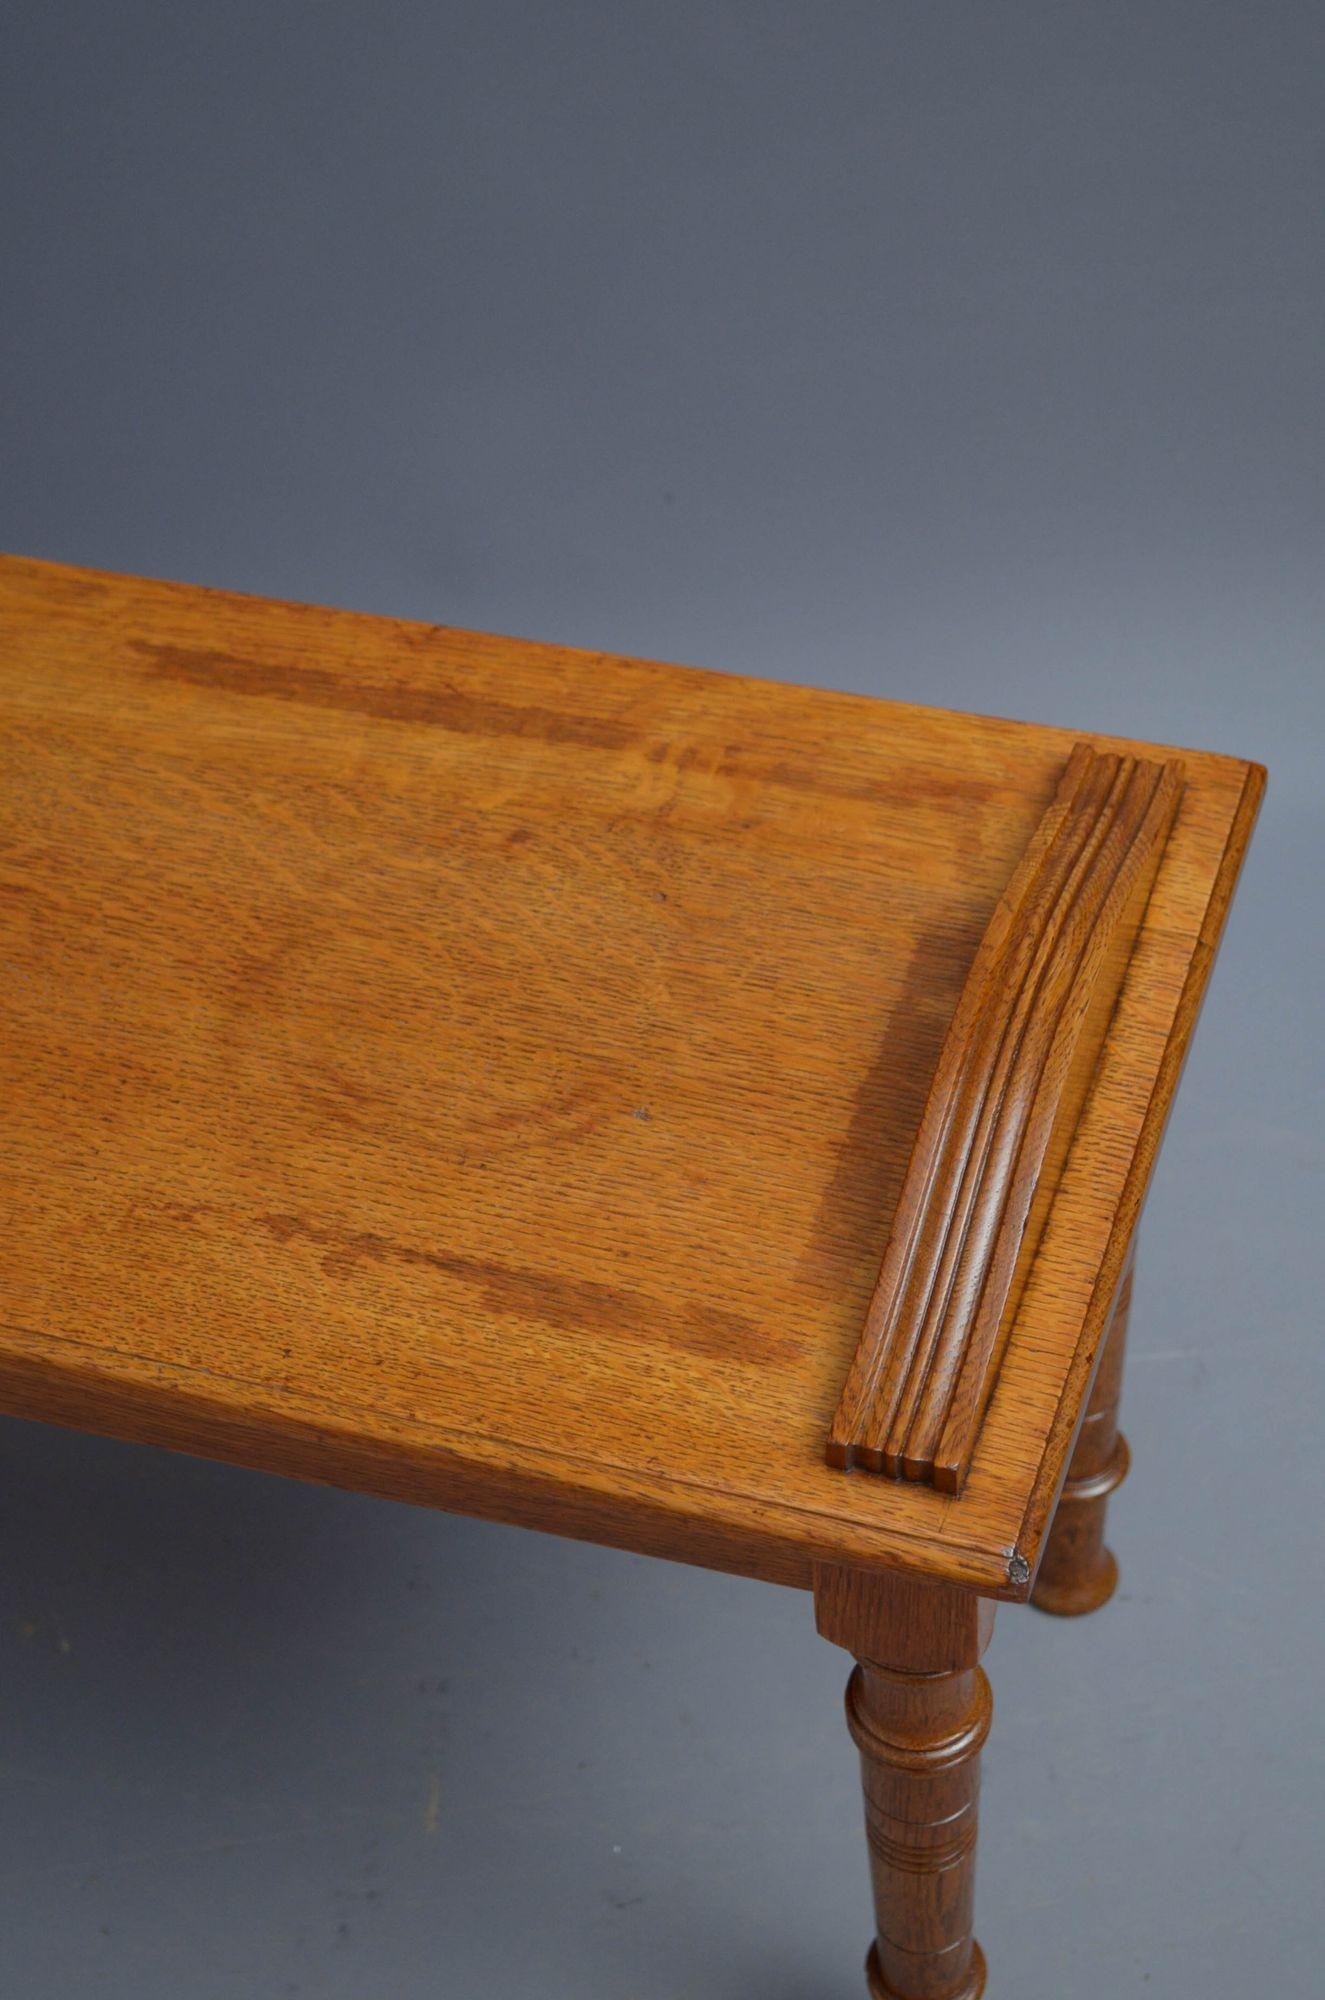 Edwardian Oak Hall Bench In Good Condition For Sale In Whaley Bridge, GB